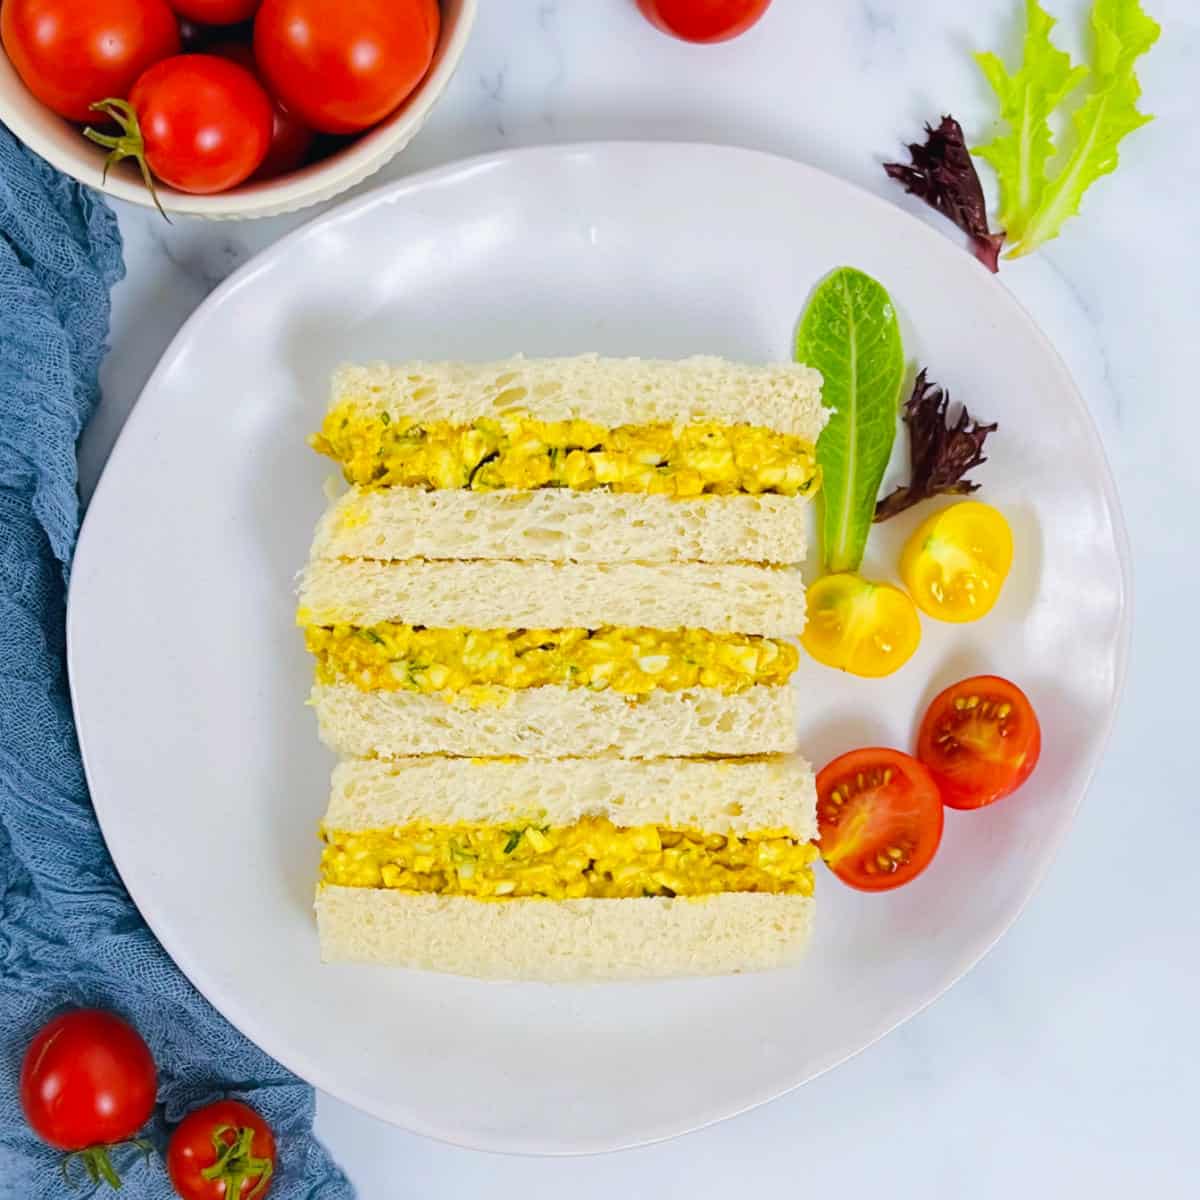 Curried egg mayo sandwich on a white plate with cherry tomatoes.